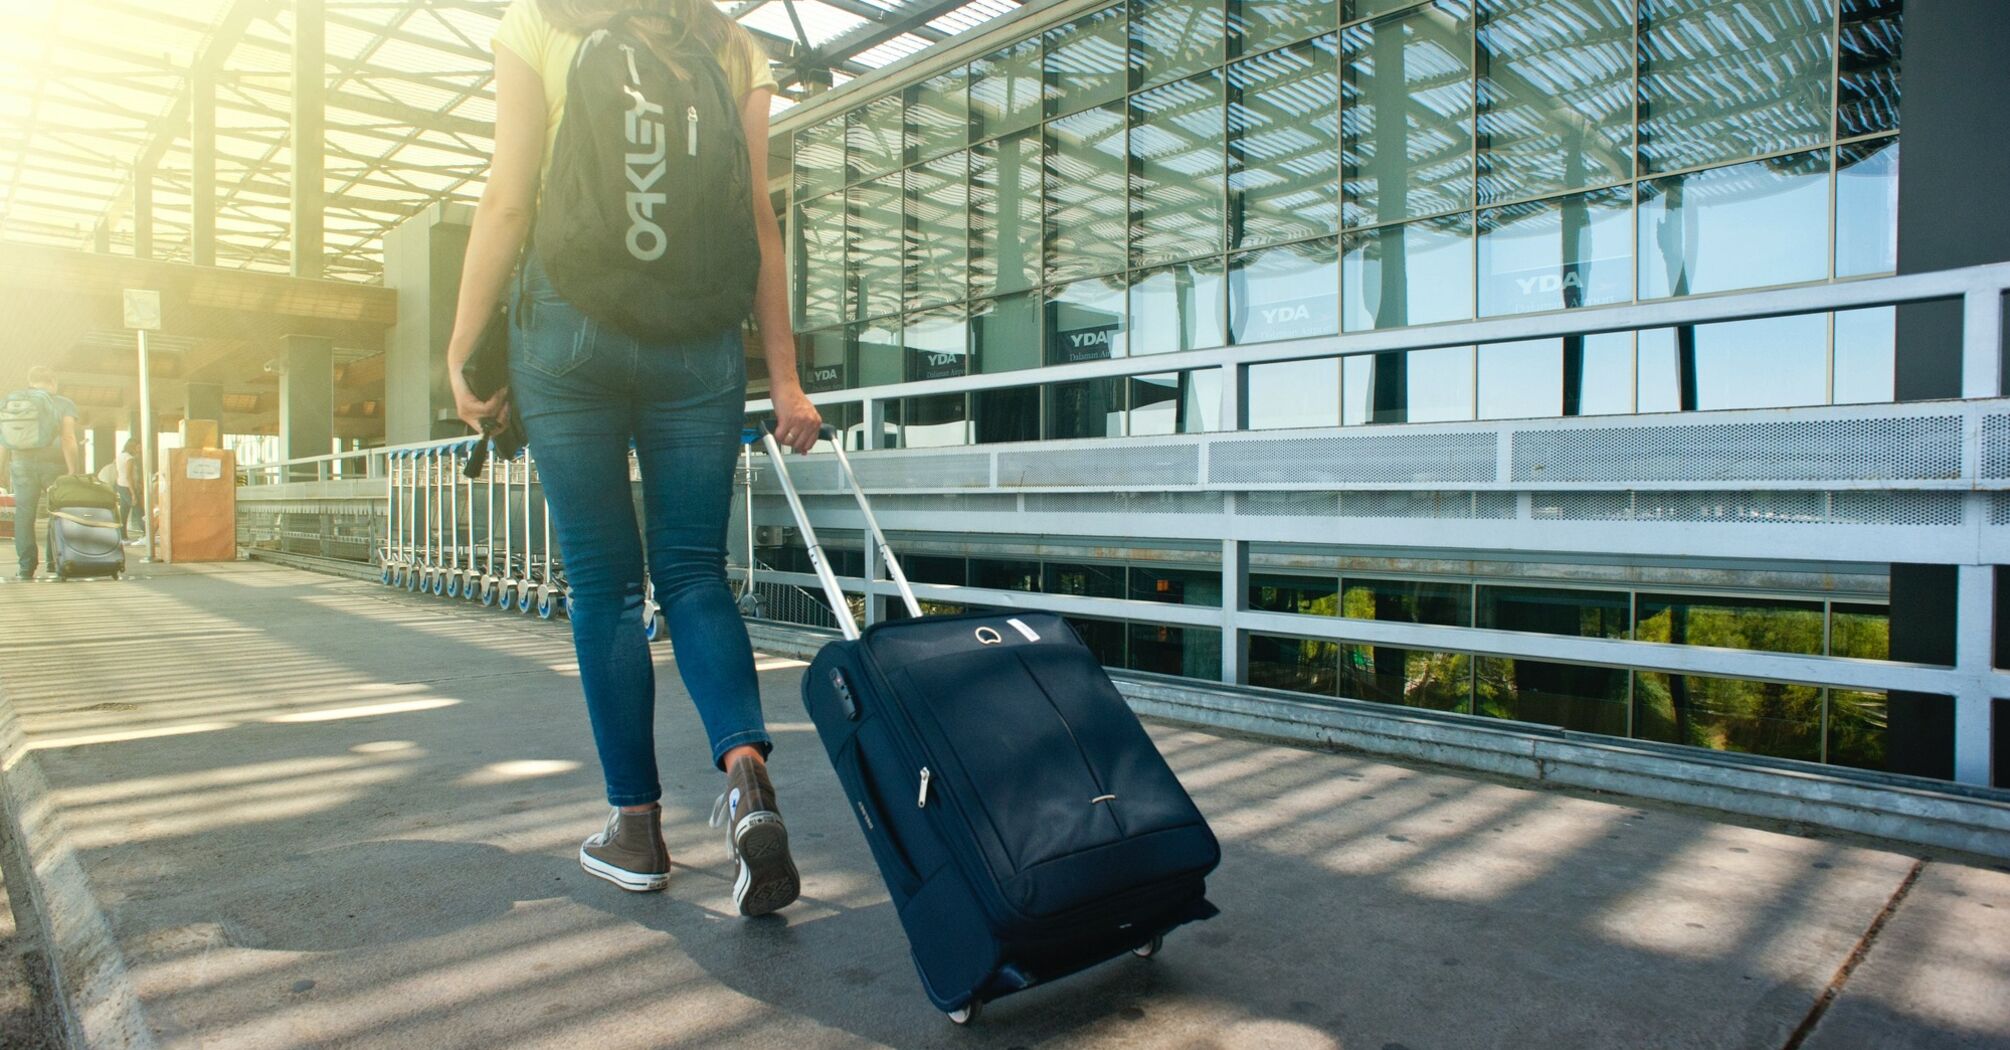 Woman walking along the path while walking with luggage